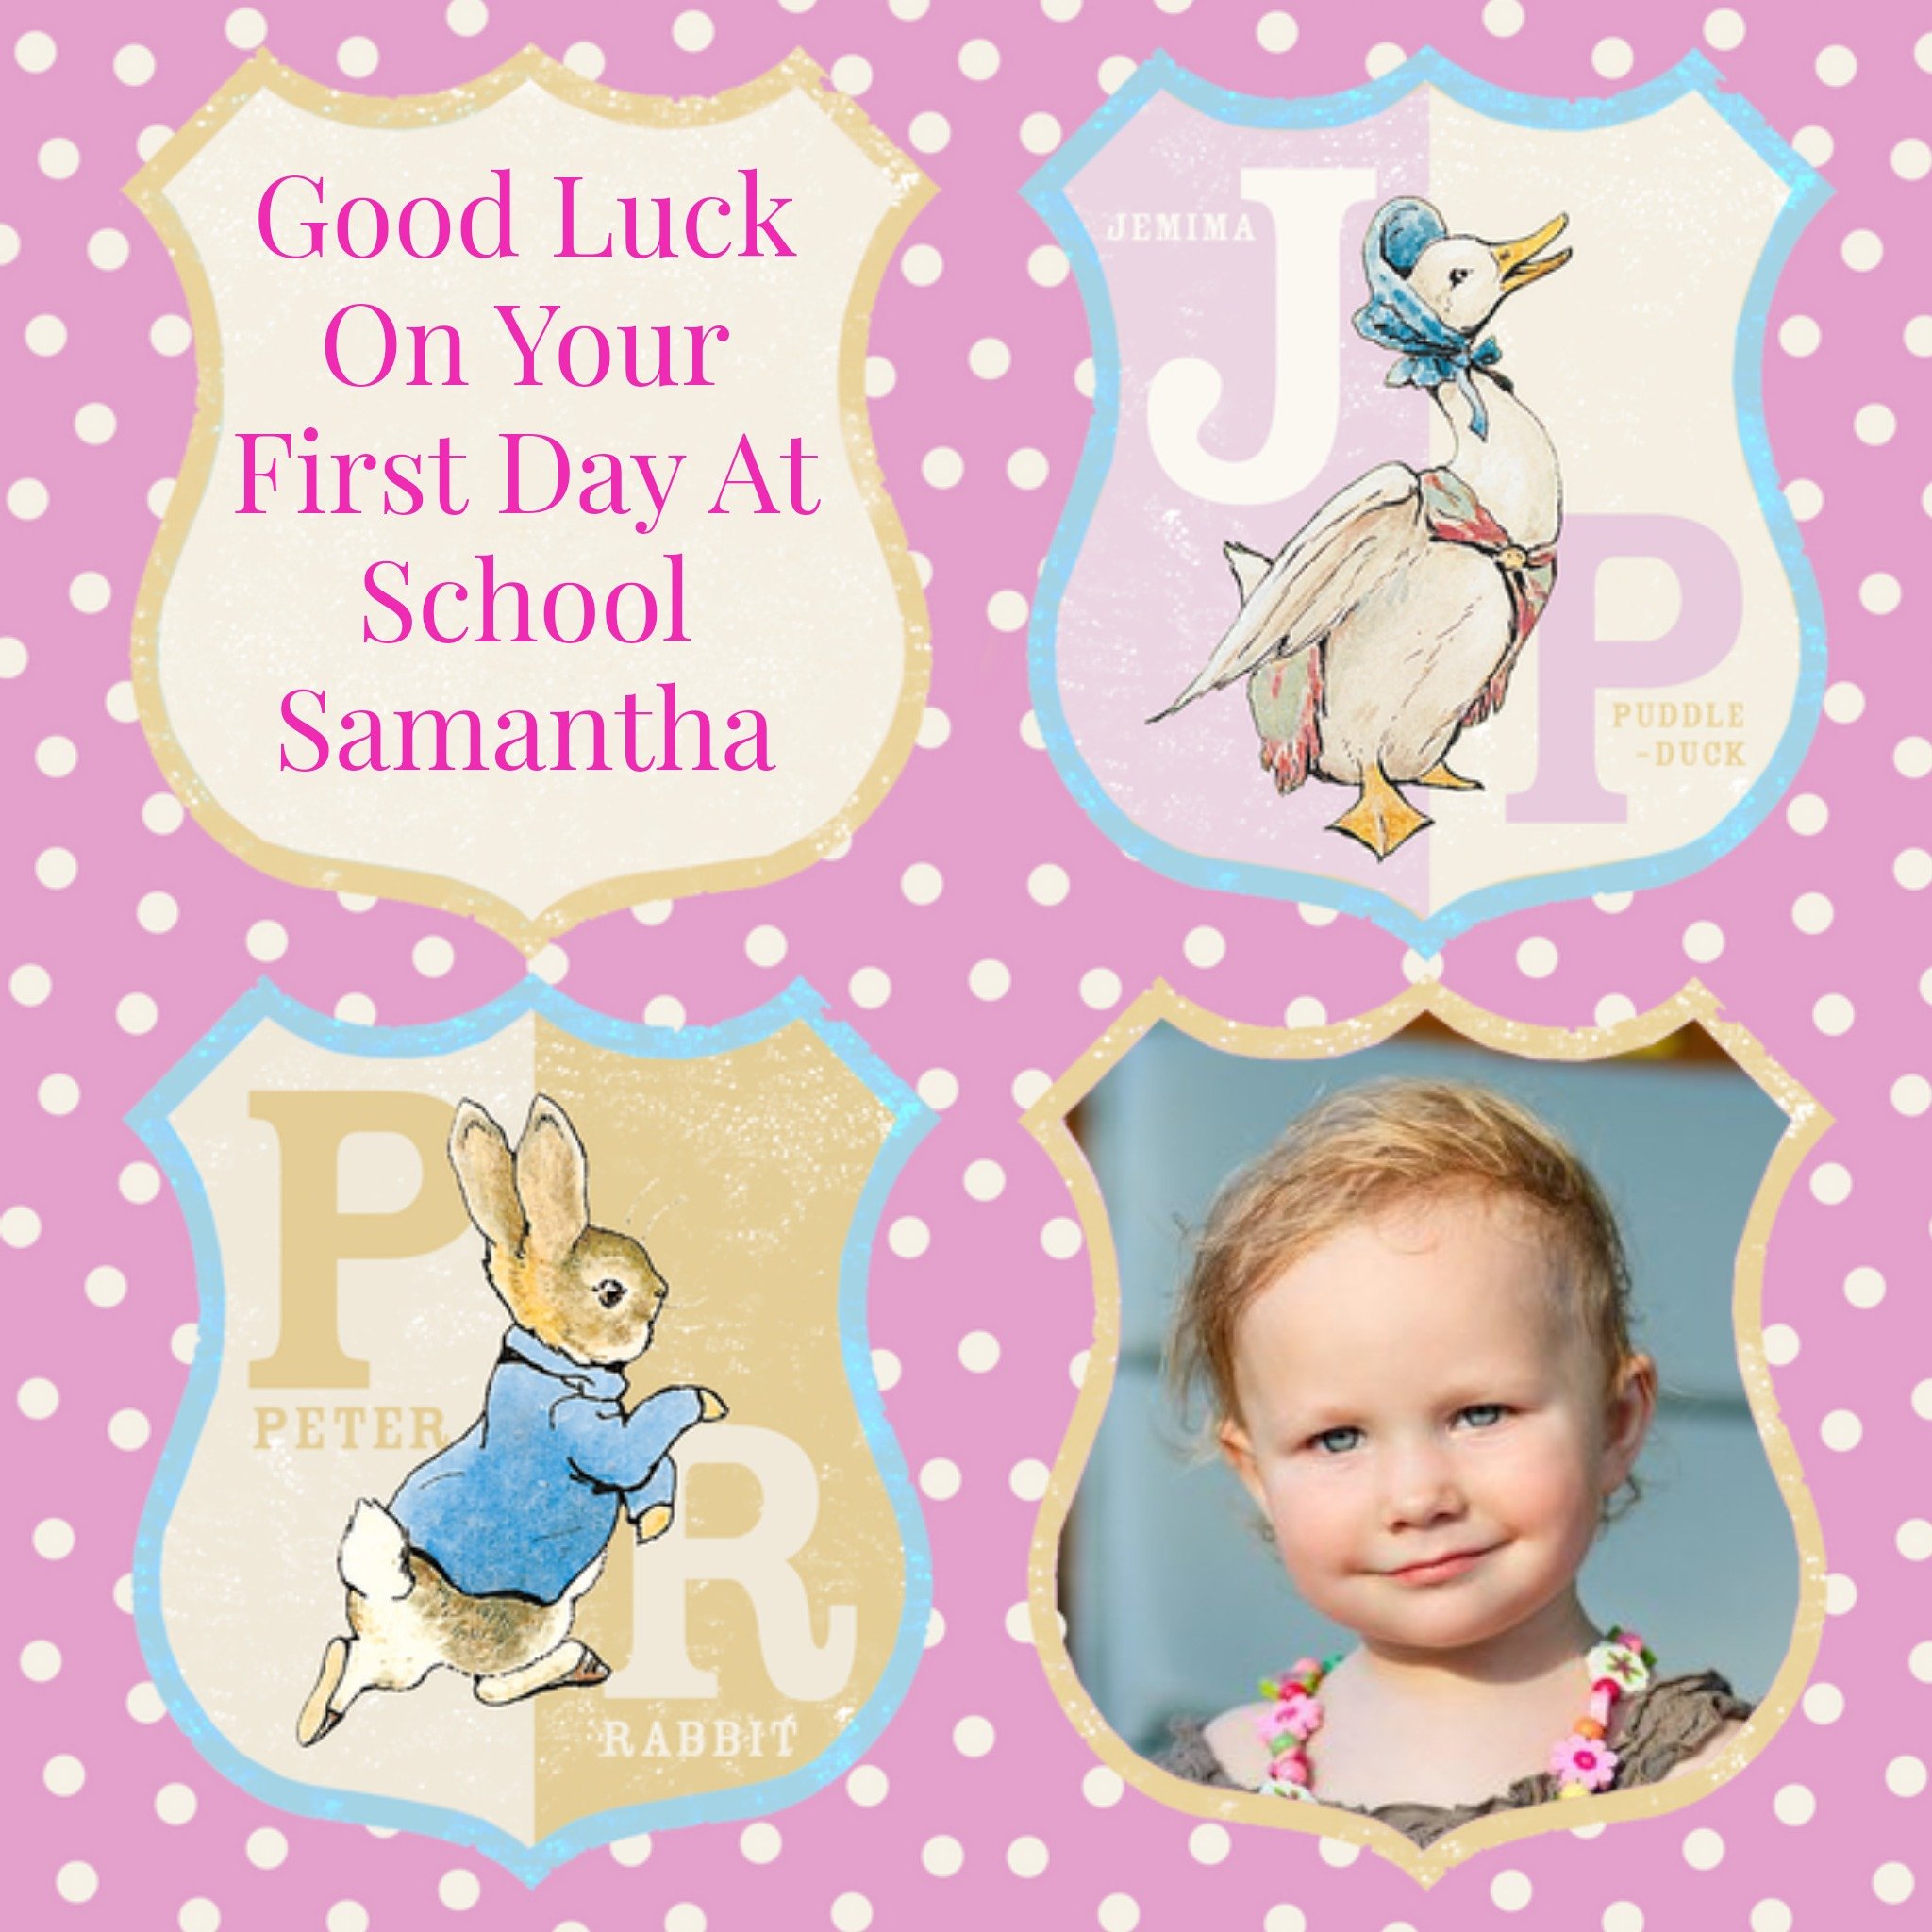 Beatrix Potter Peter Rabbit Jemima Puddle Duck Personalised Photo Upload Good Luck On Your First Day